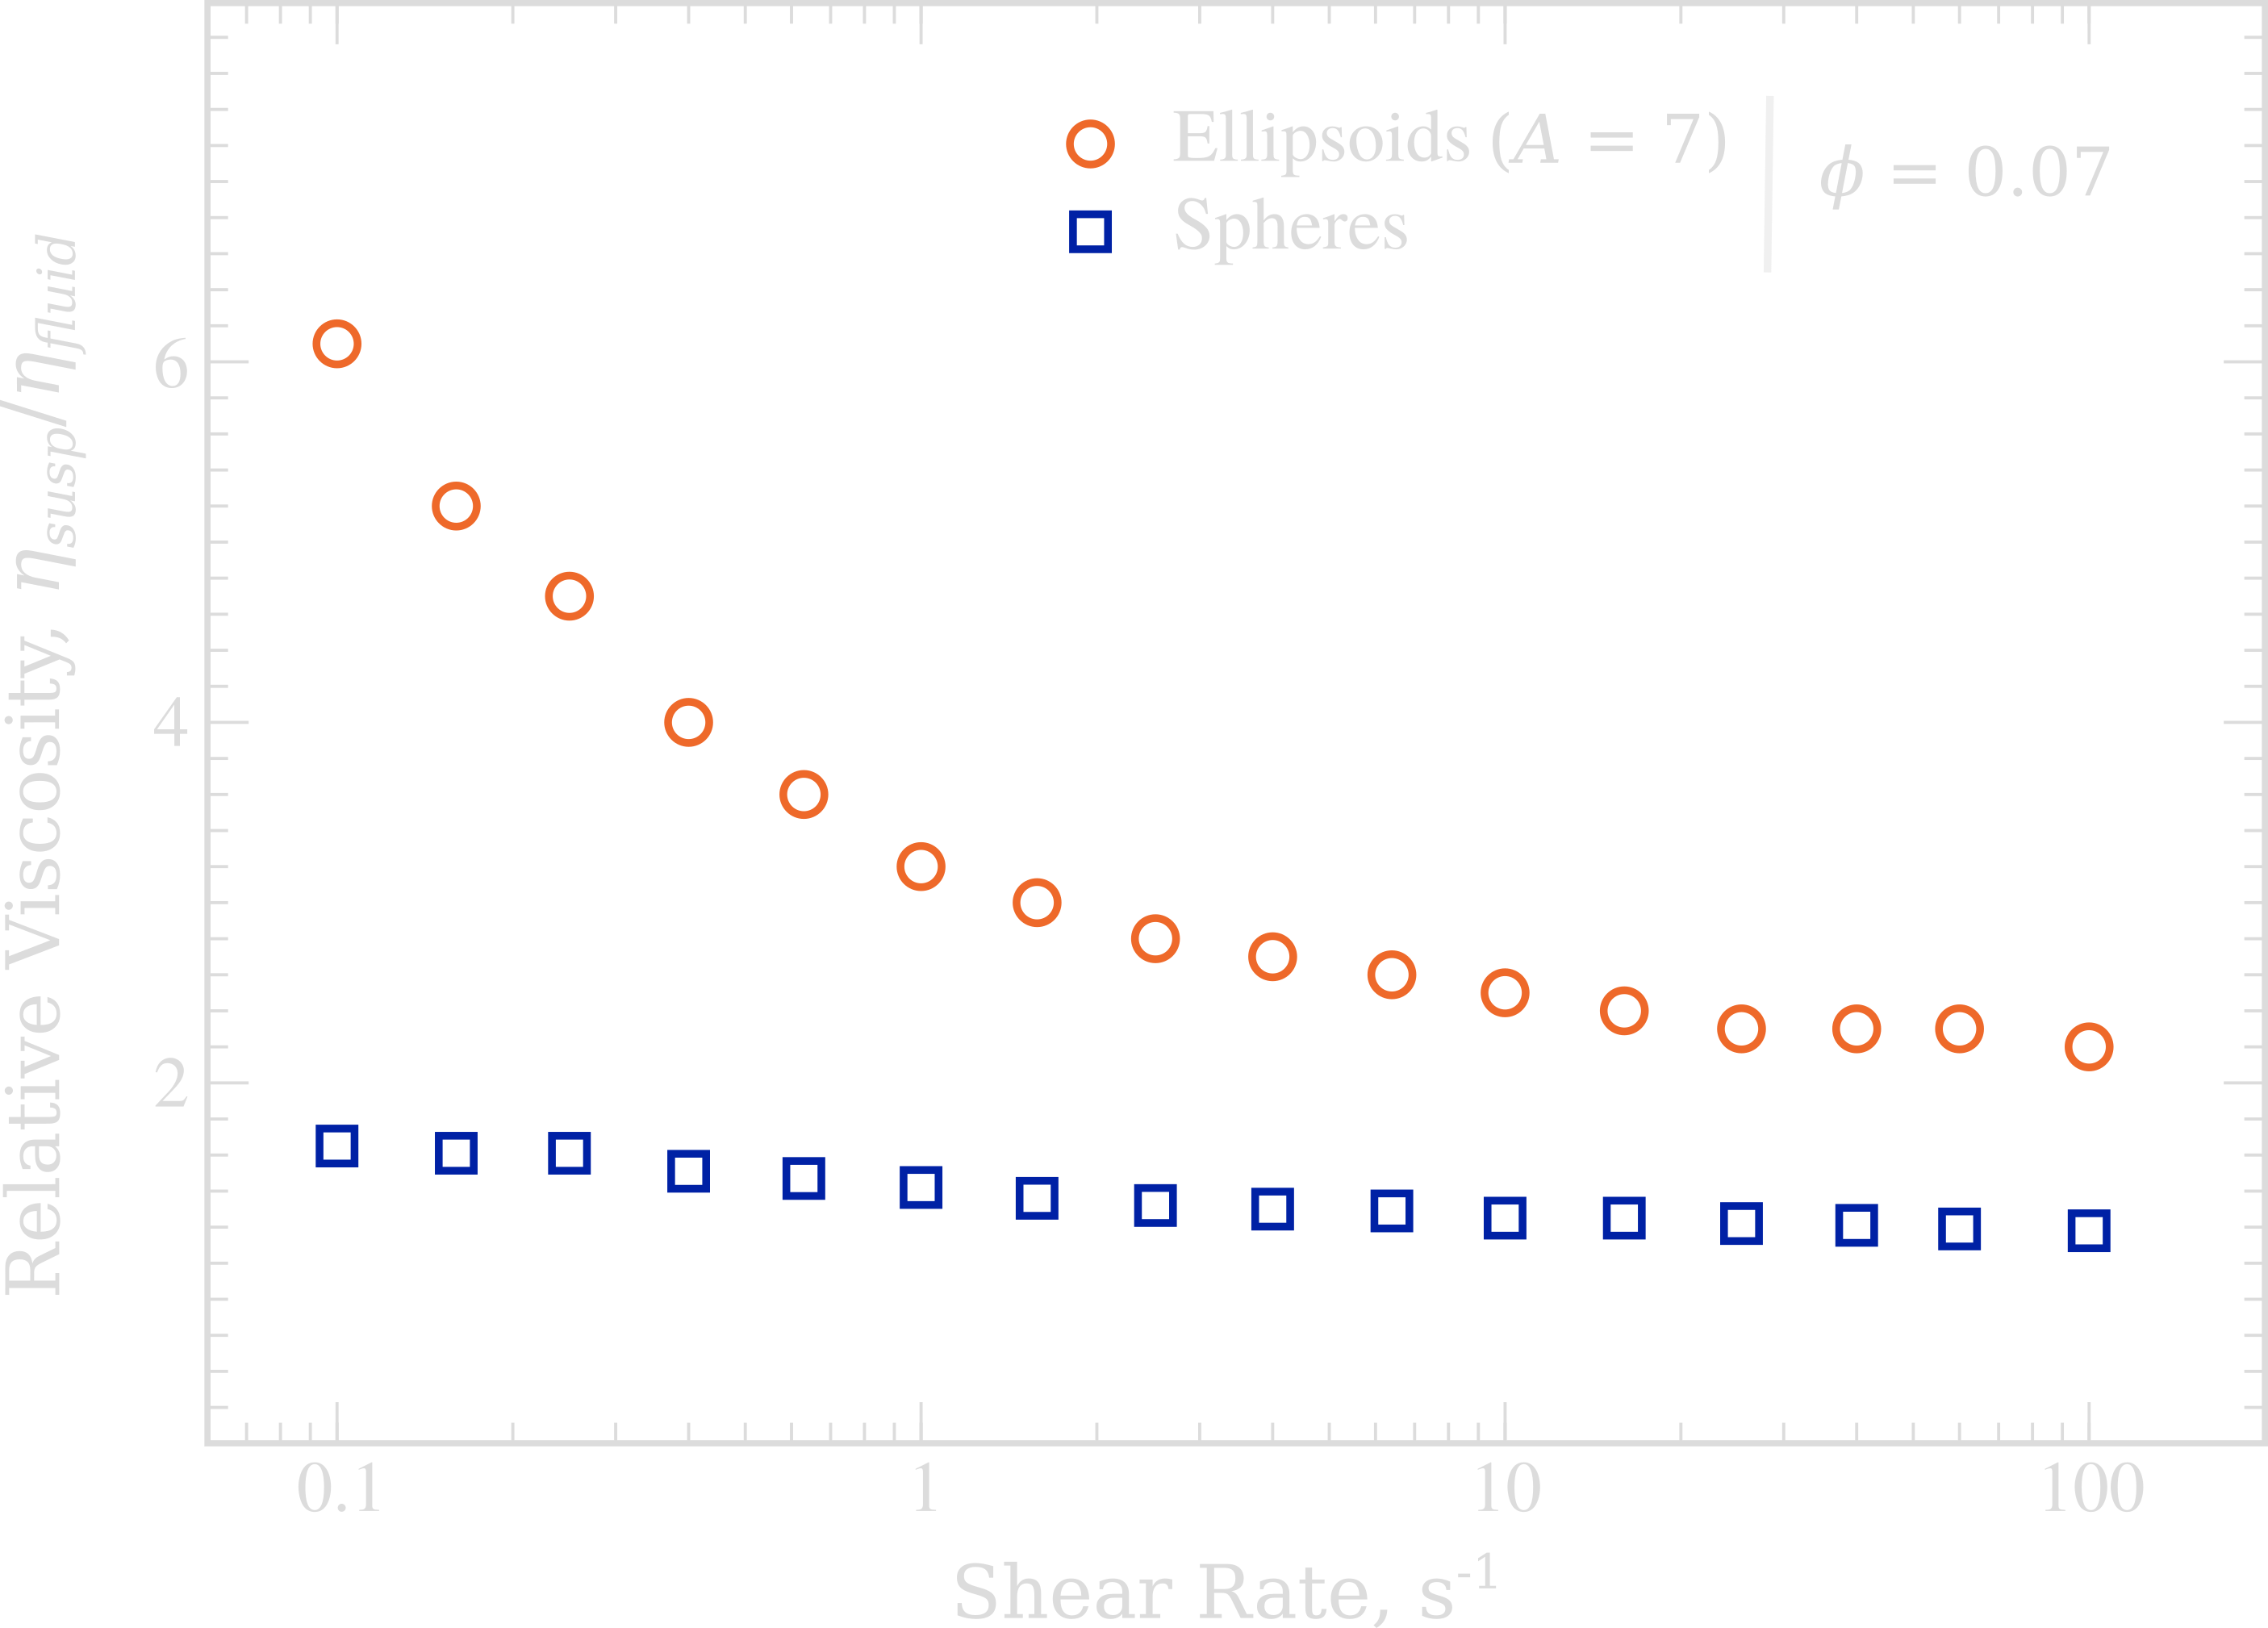 Comparsion of ellipsoid and sphere viscosities